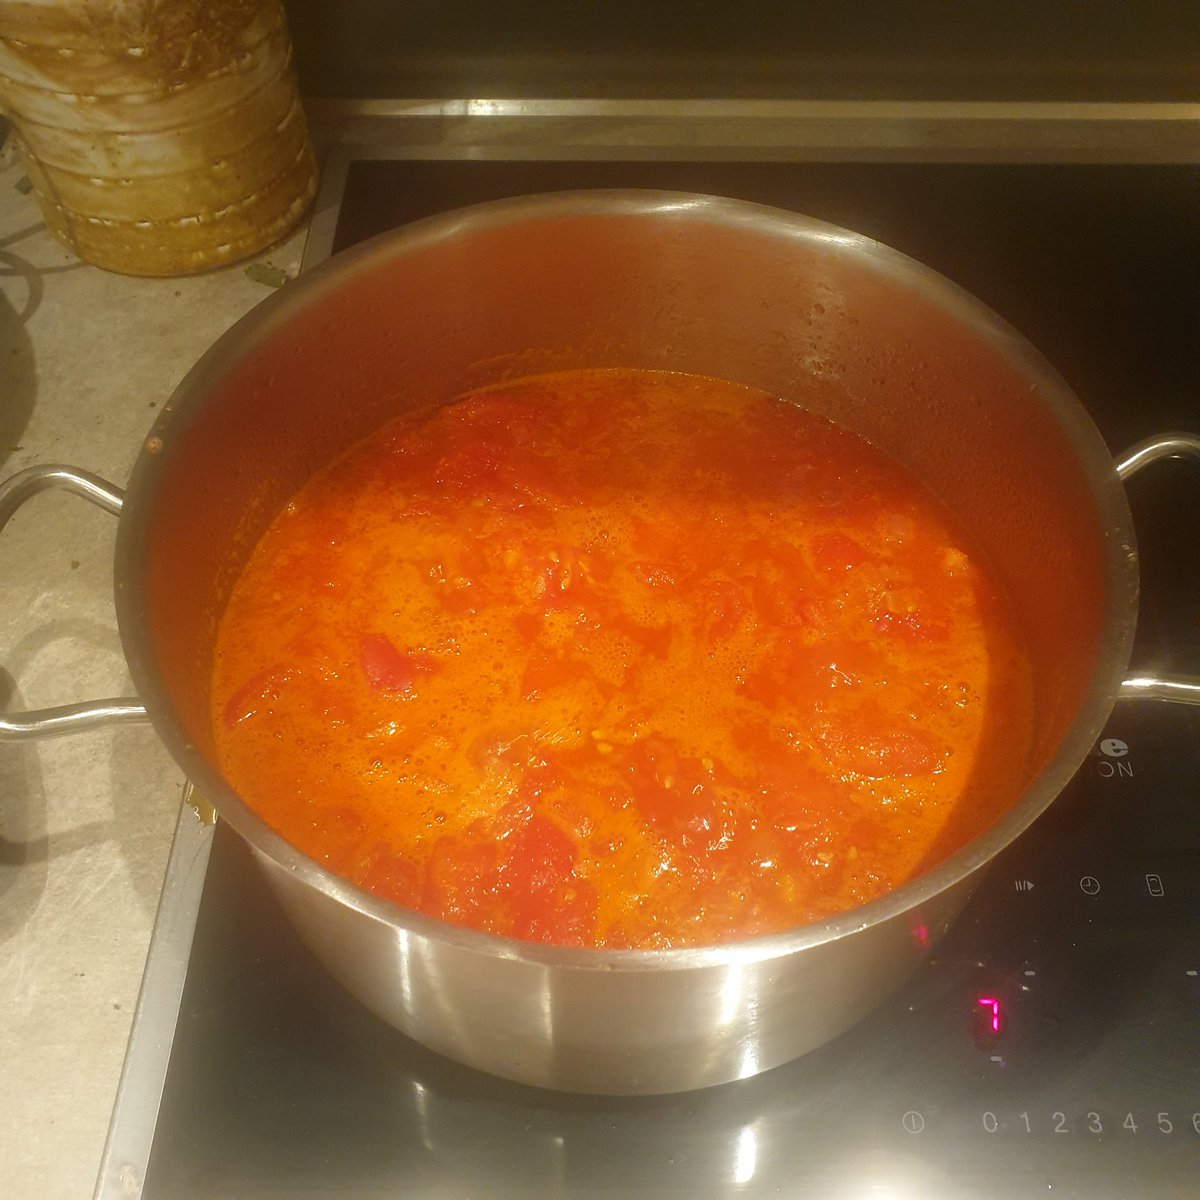 slowly. keep that heat on a low simmer. dont rush this. dont let the sugars in the tomatoes caremelize. then its game over, no more flavour development. low and slow. stir frequently. relax